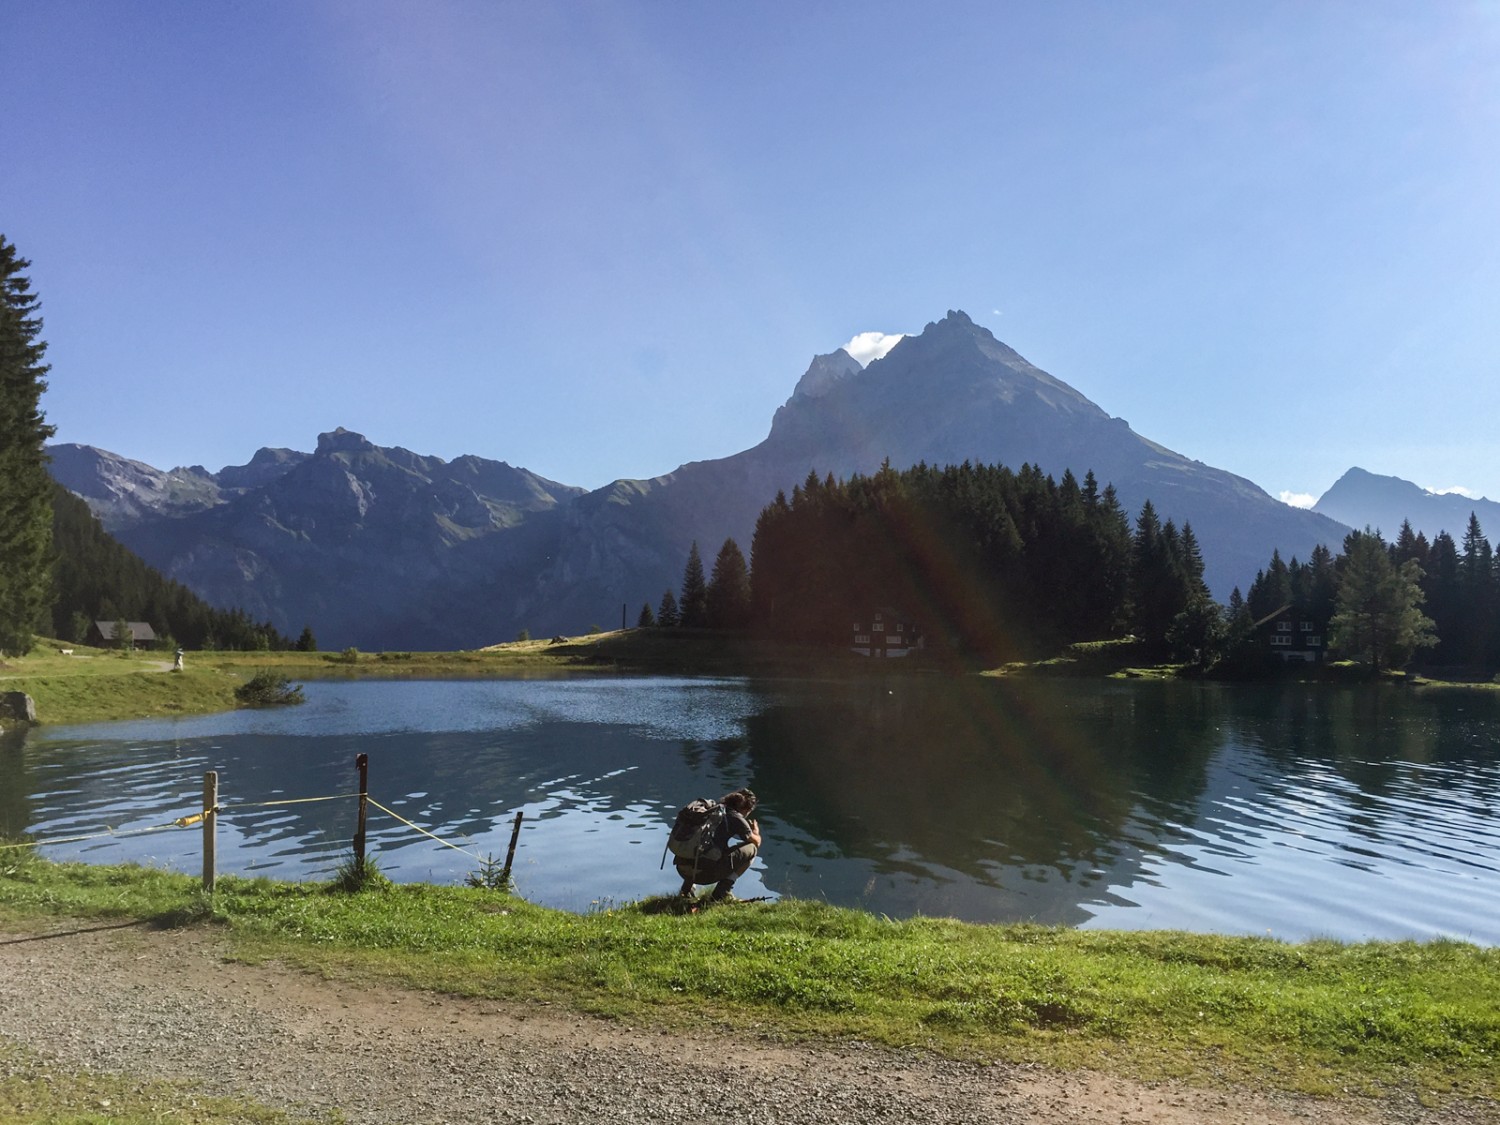 L’Arnisee, paisible sous le soleil matinal.  Photo: Vera In-Albon